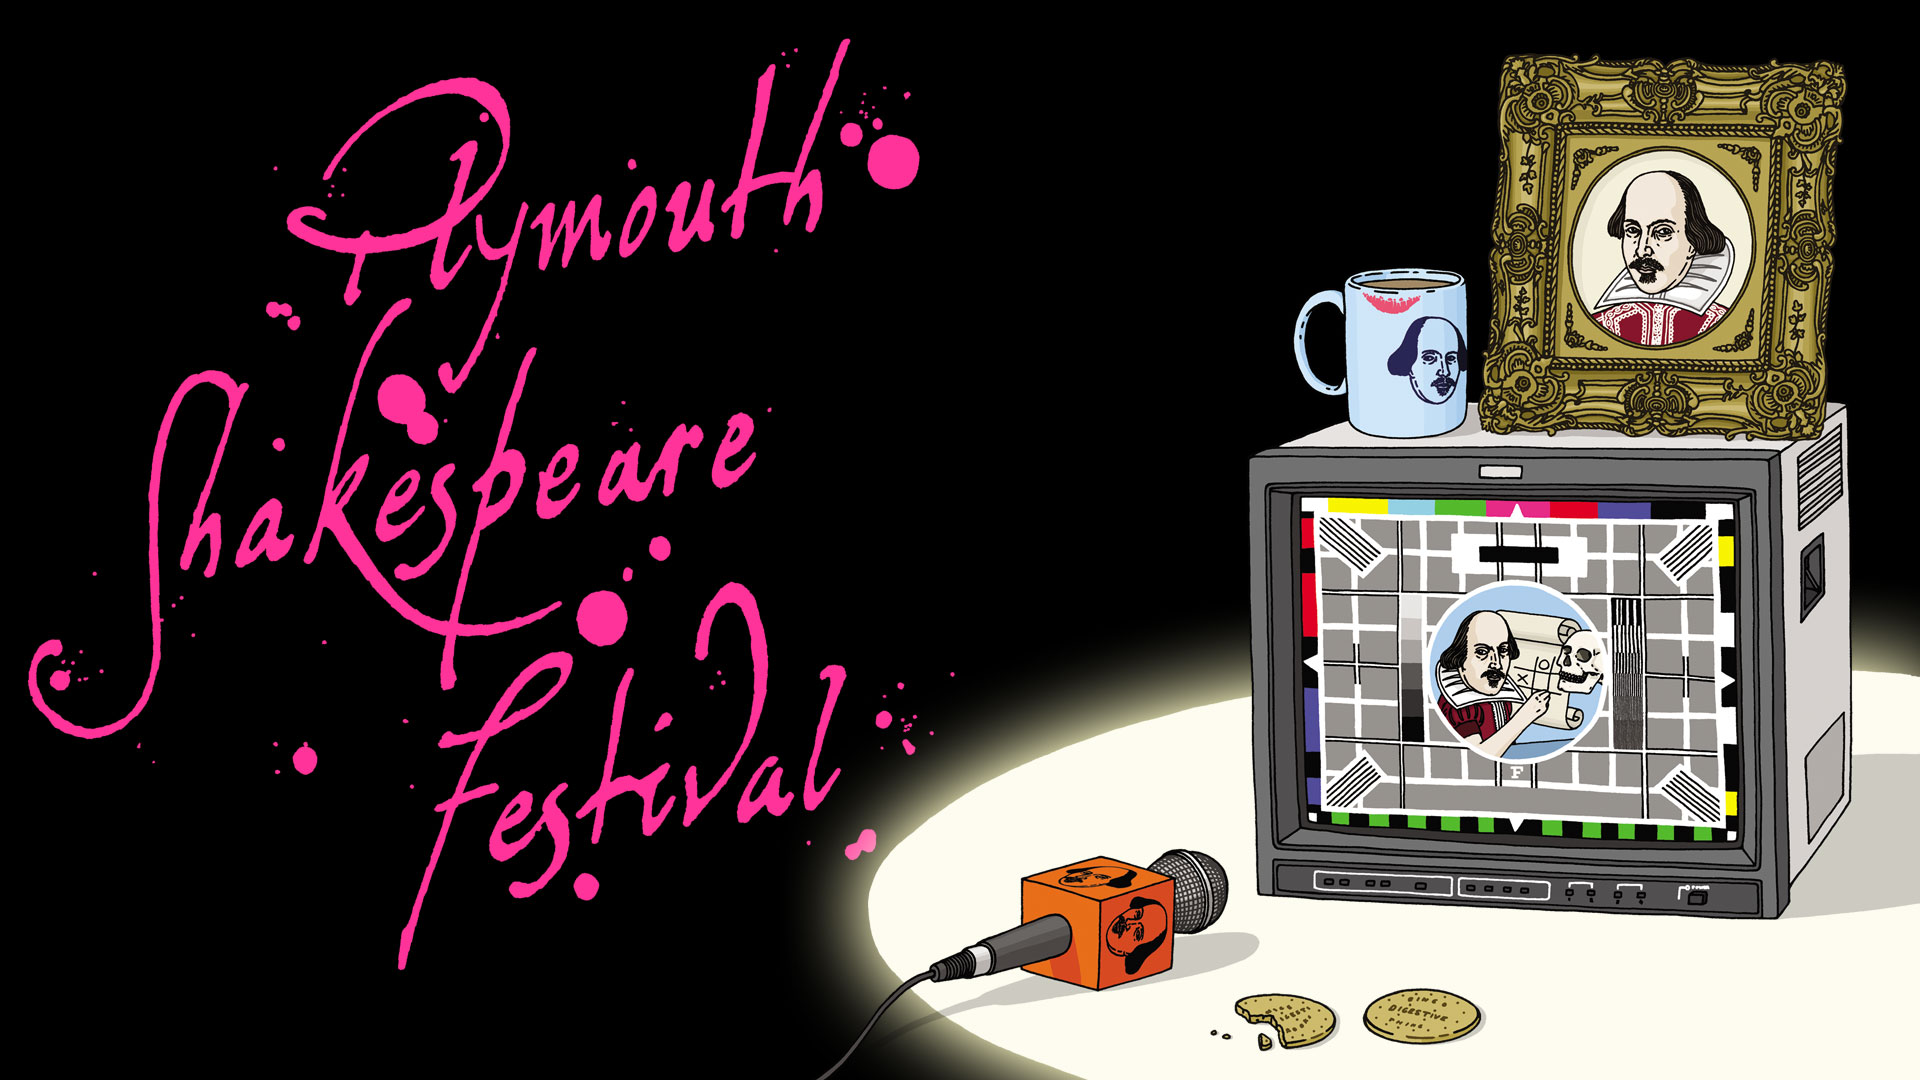 Plymouth Shakespeare Festival, event promotion